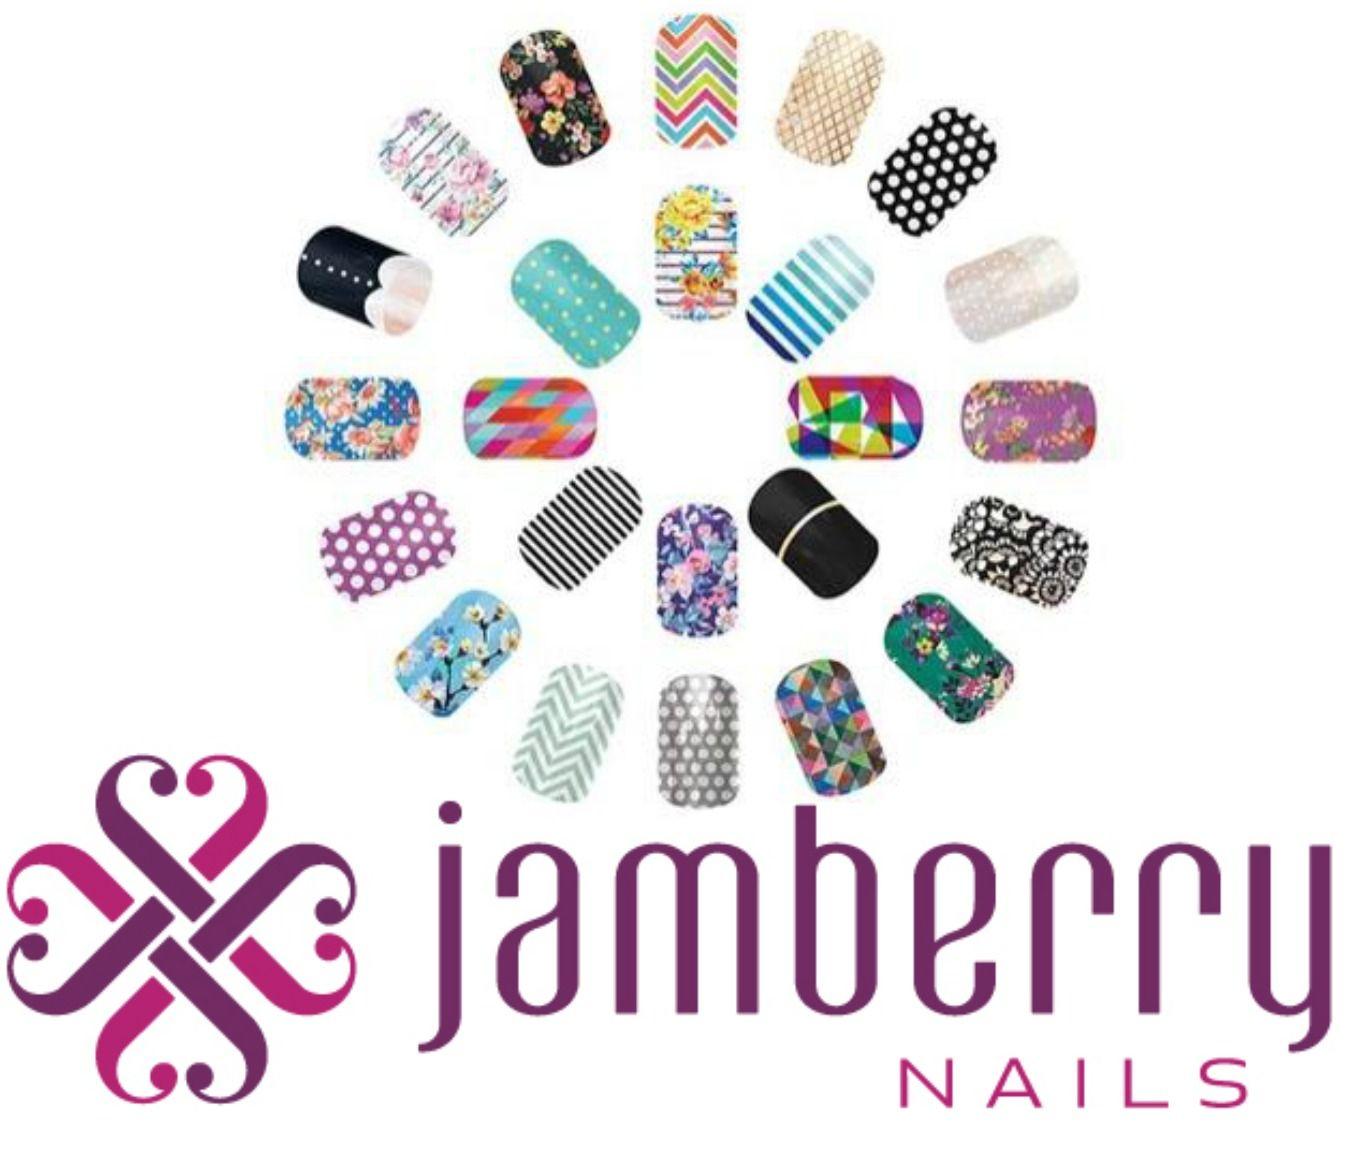 Jamberry Nails Logo - Beauty Blog by Angela Woodward: REVIEW: Jamberry Nail Wraps